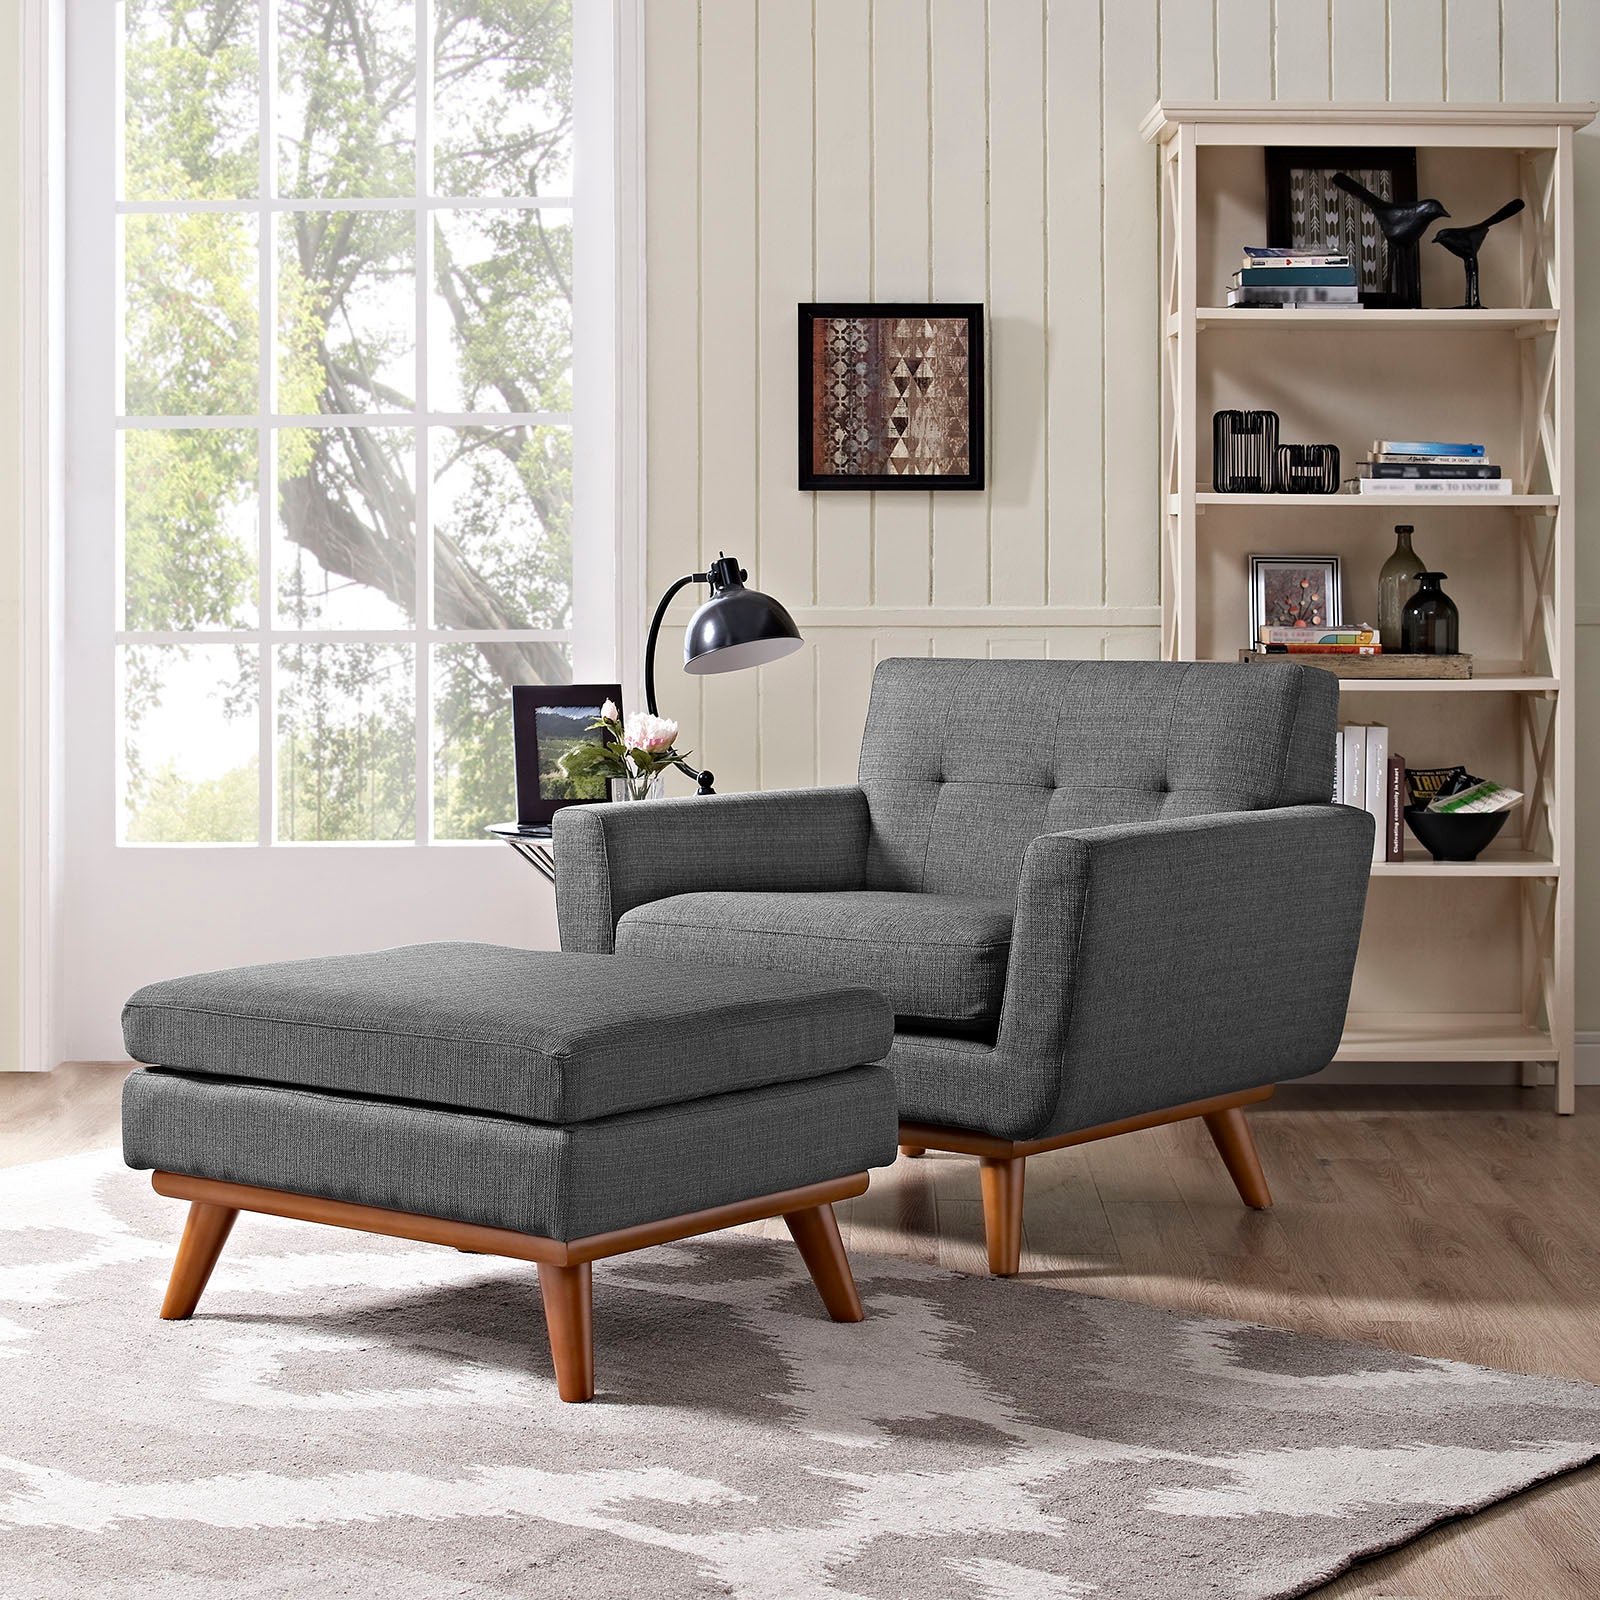 Modway Living Room Sets - Engage 2 Piece Armchair and Ottoman Gray